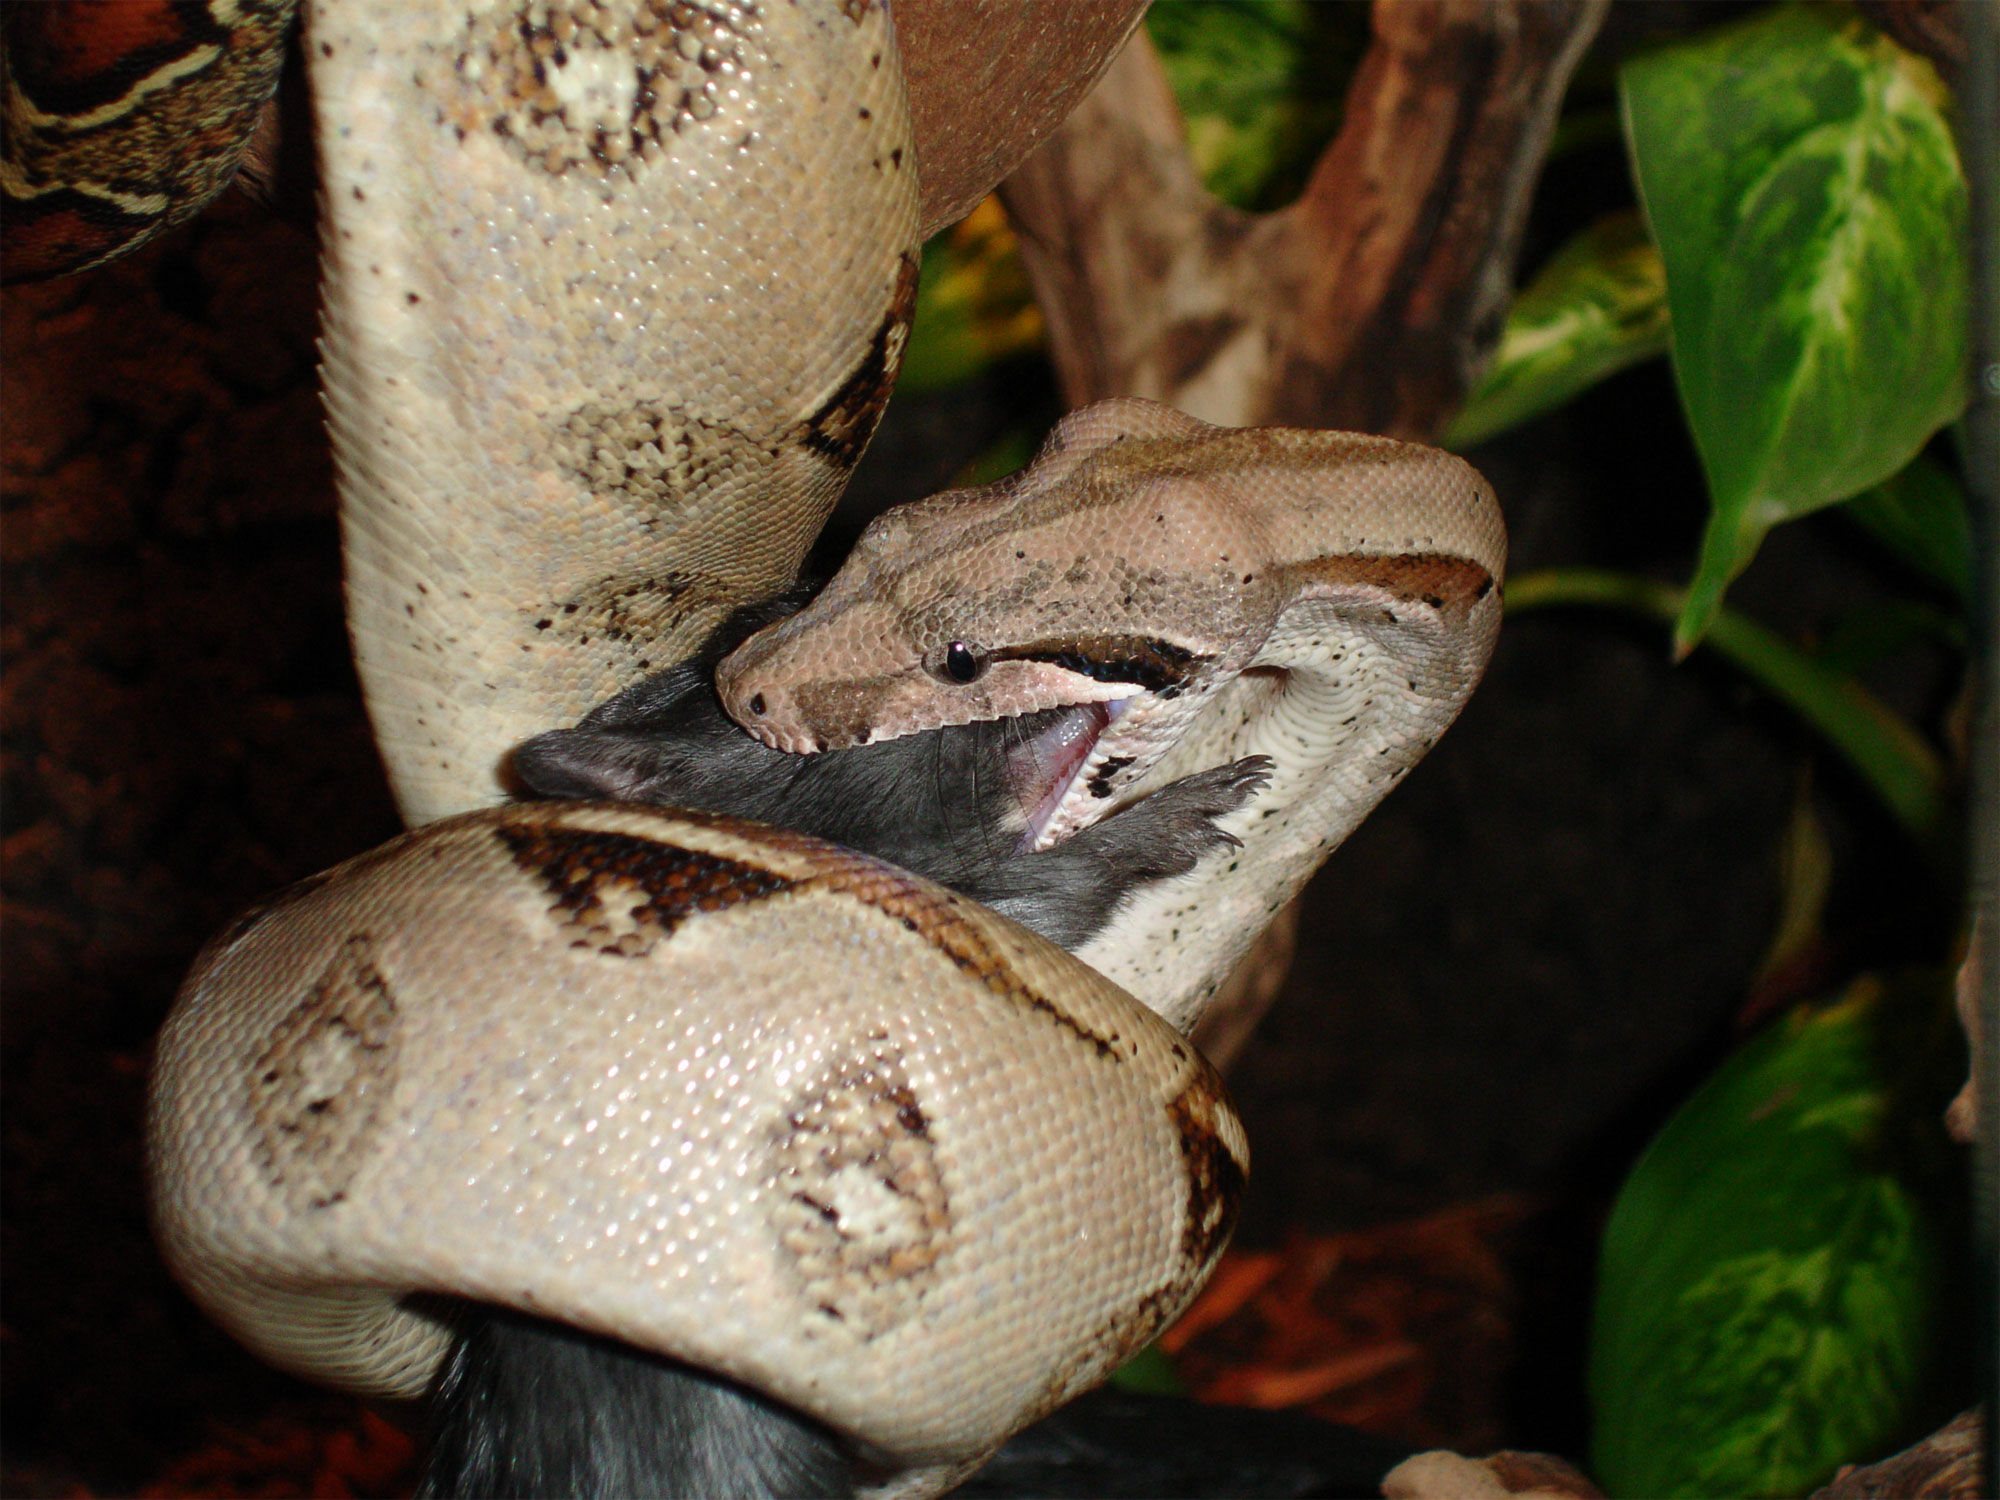 constrictor snakes